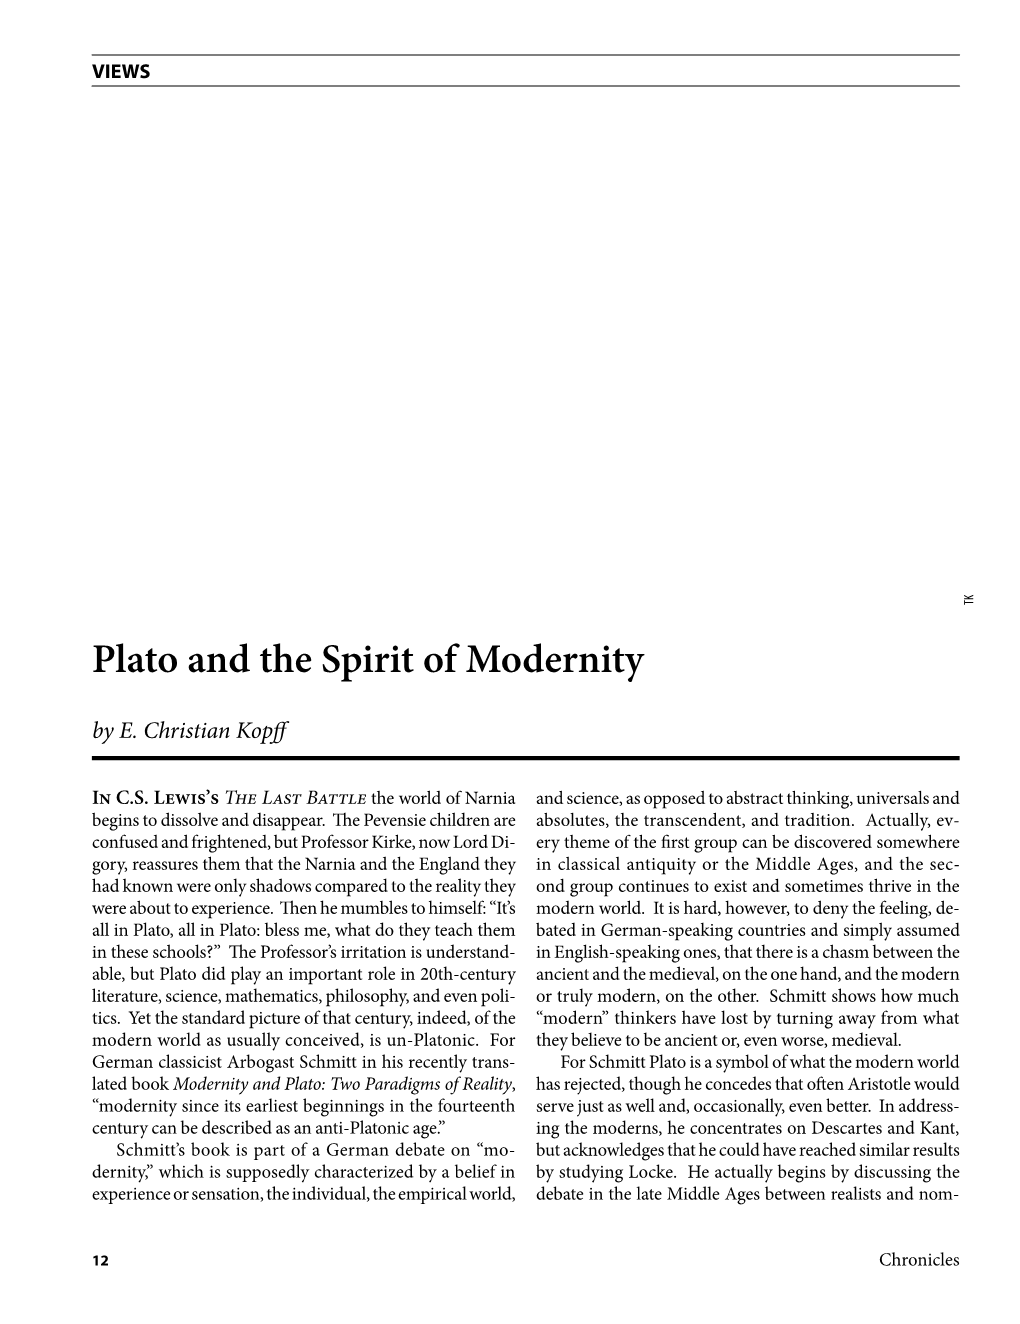 Plato and the Spirit of Modernity by E